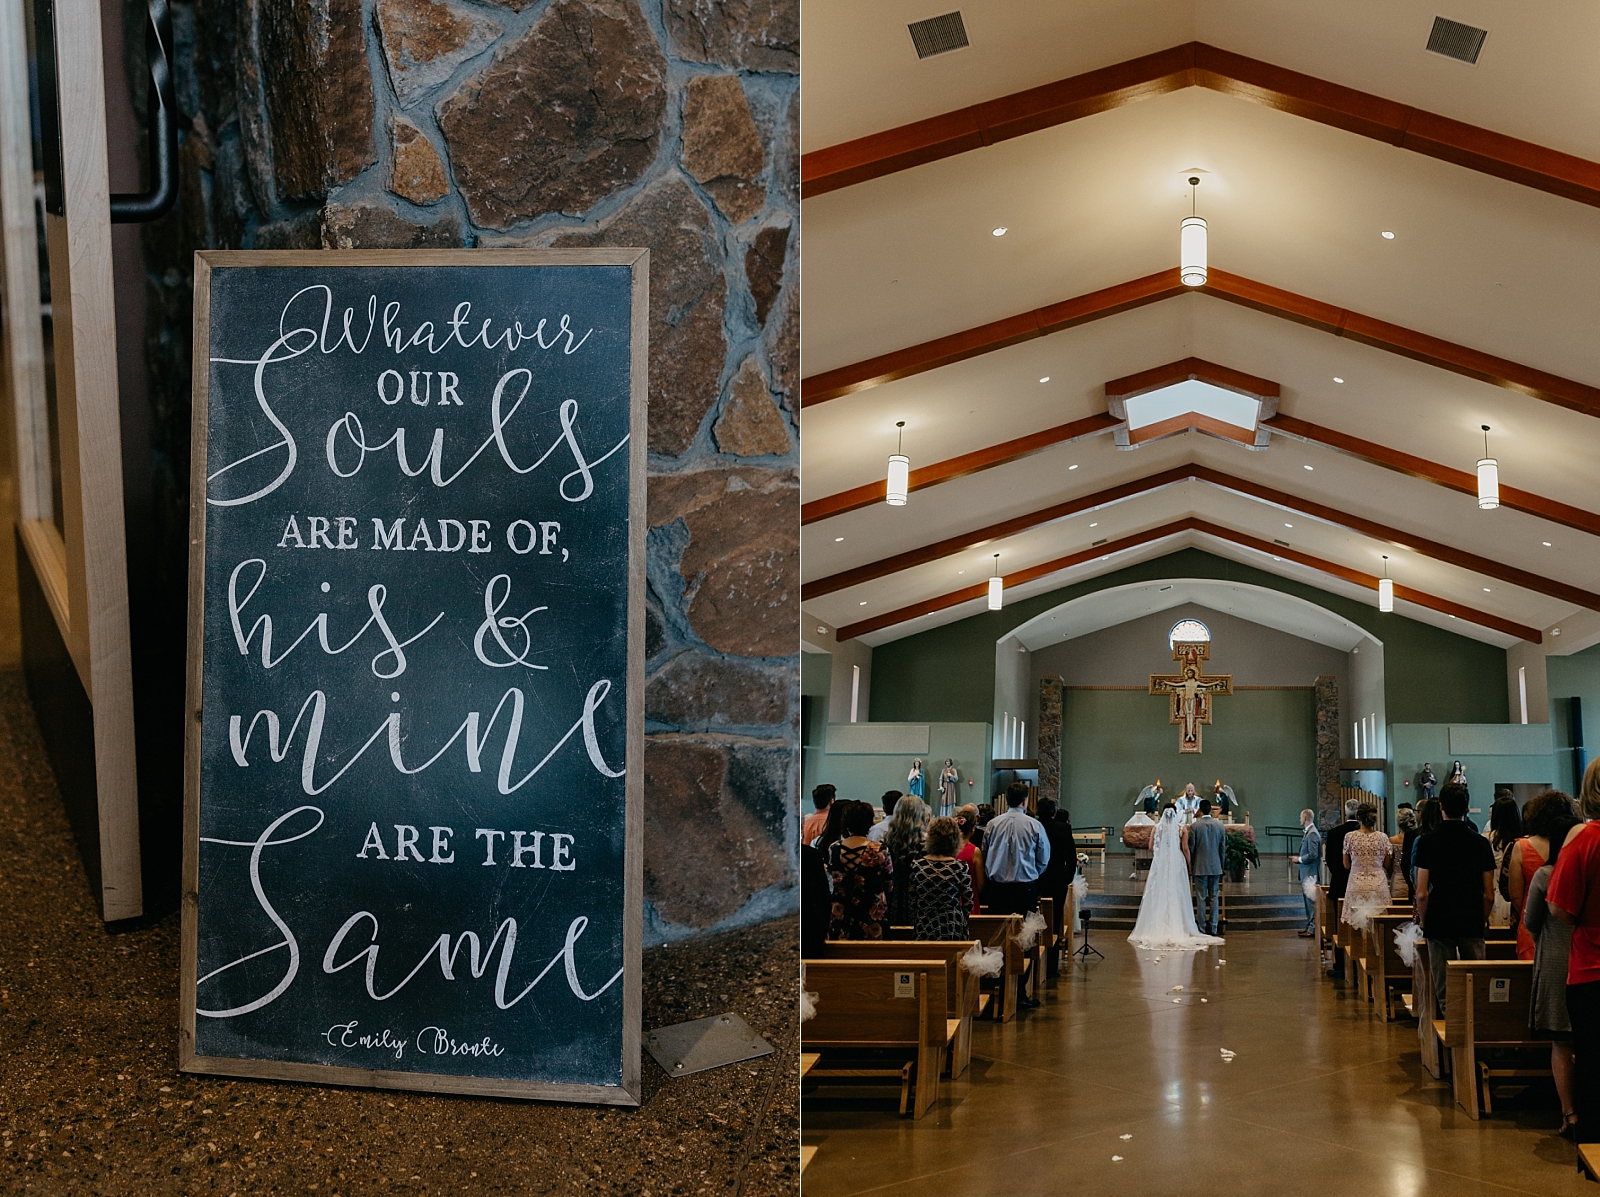 Ceremony details Whatever our souls are made of his and mine are the same sign San Francisco de Asis Catholic Church Wedding Photos Flagstaff, Arizona Samantha Patri Photography